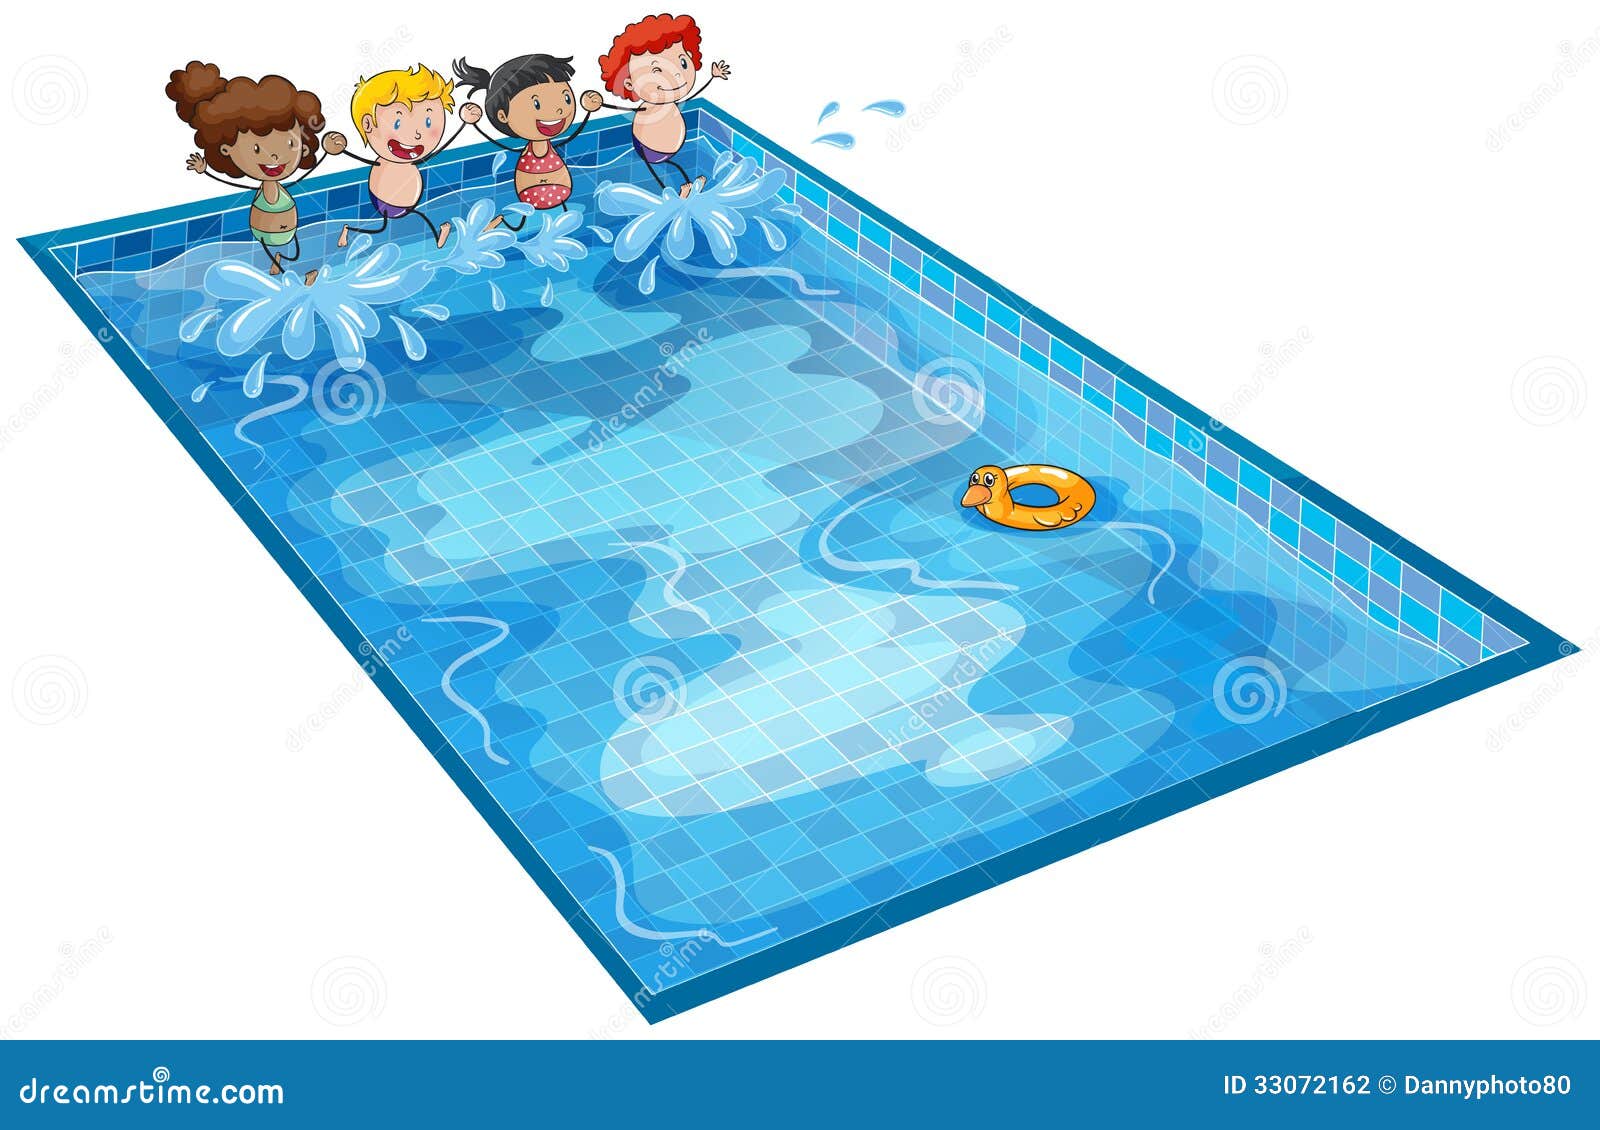 free clipart images swimming pool - photo #43